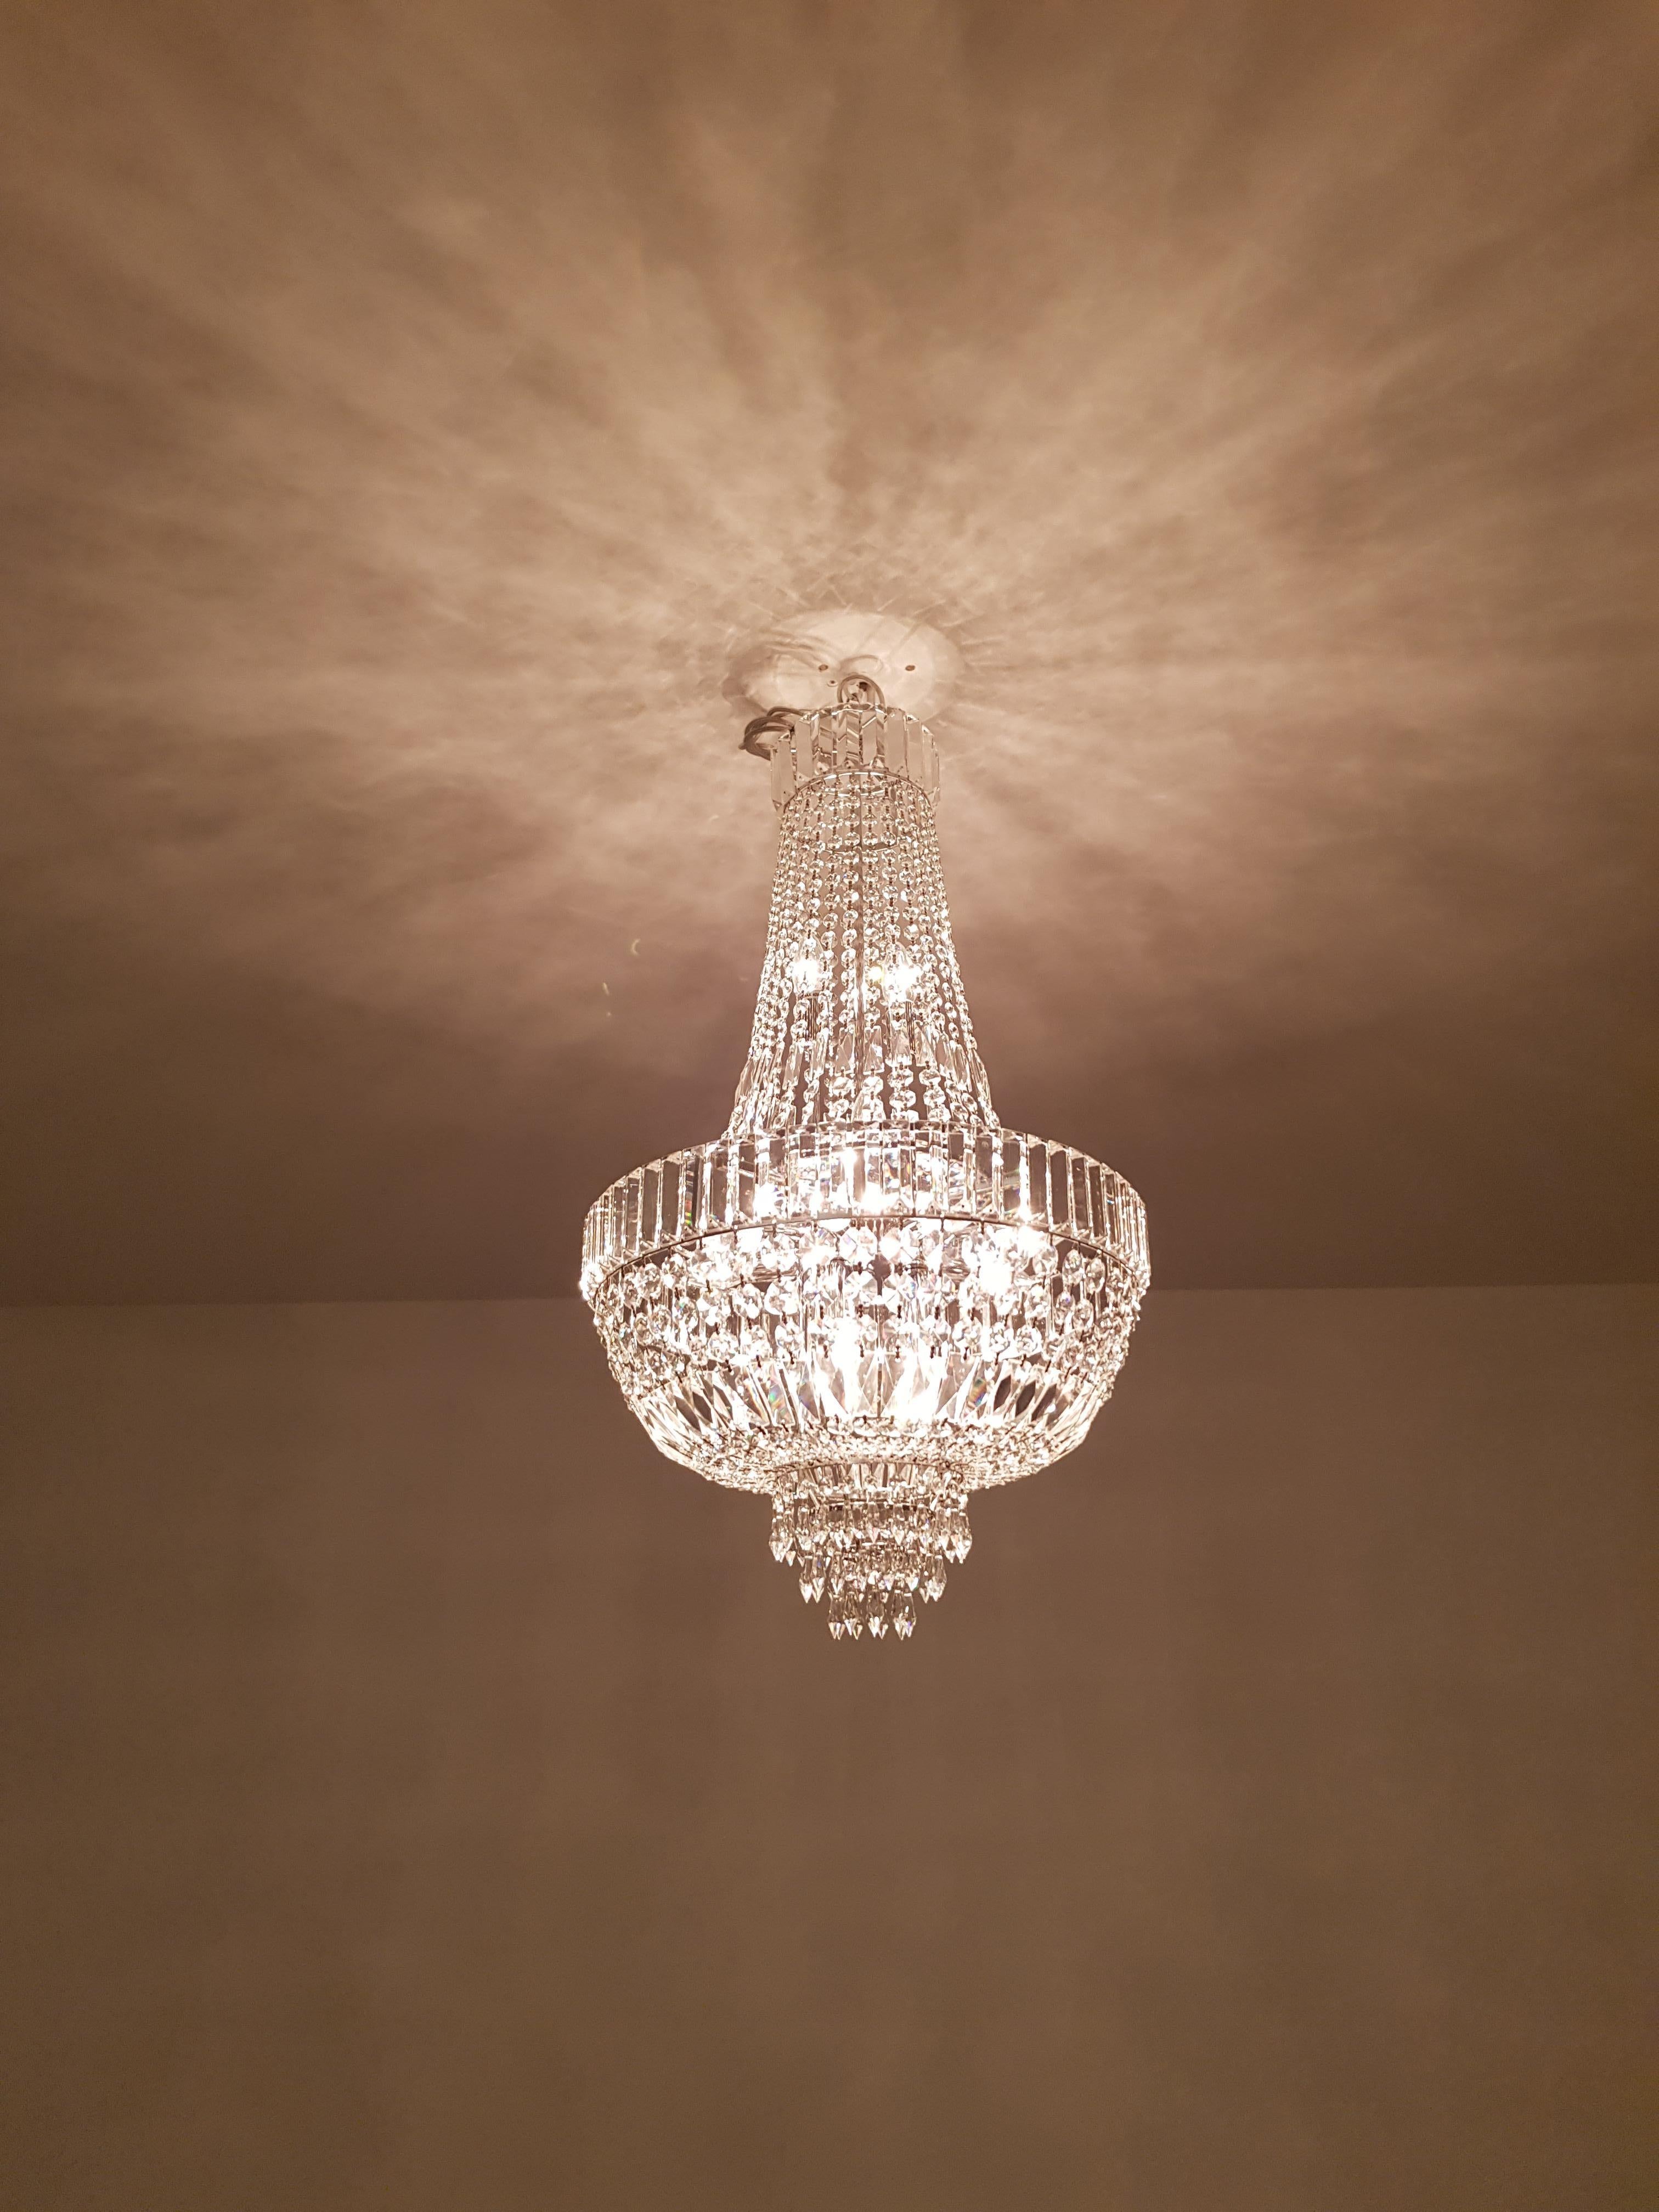 Introducing a new Art Deco crystal style chandelier that captures the grandeur of the Empire era while offering modern sophistication. Crafted with exquisite lead crystal, this chandelier is the result of meticulous in-house production, ensuring the